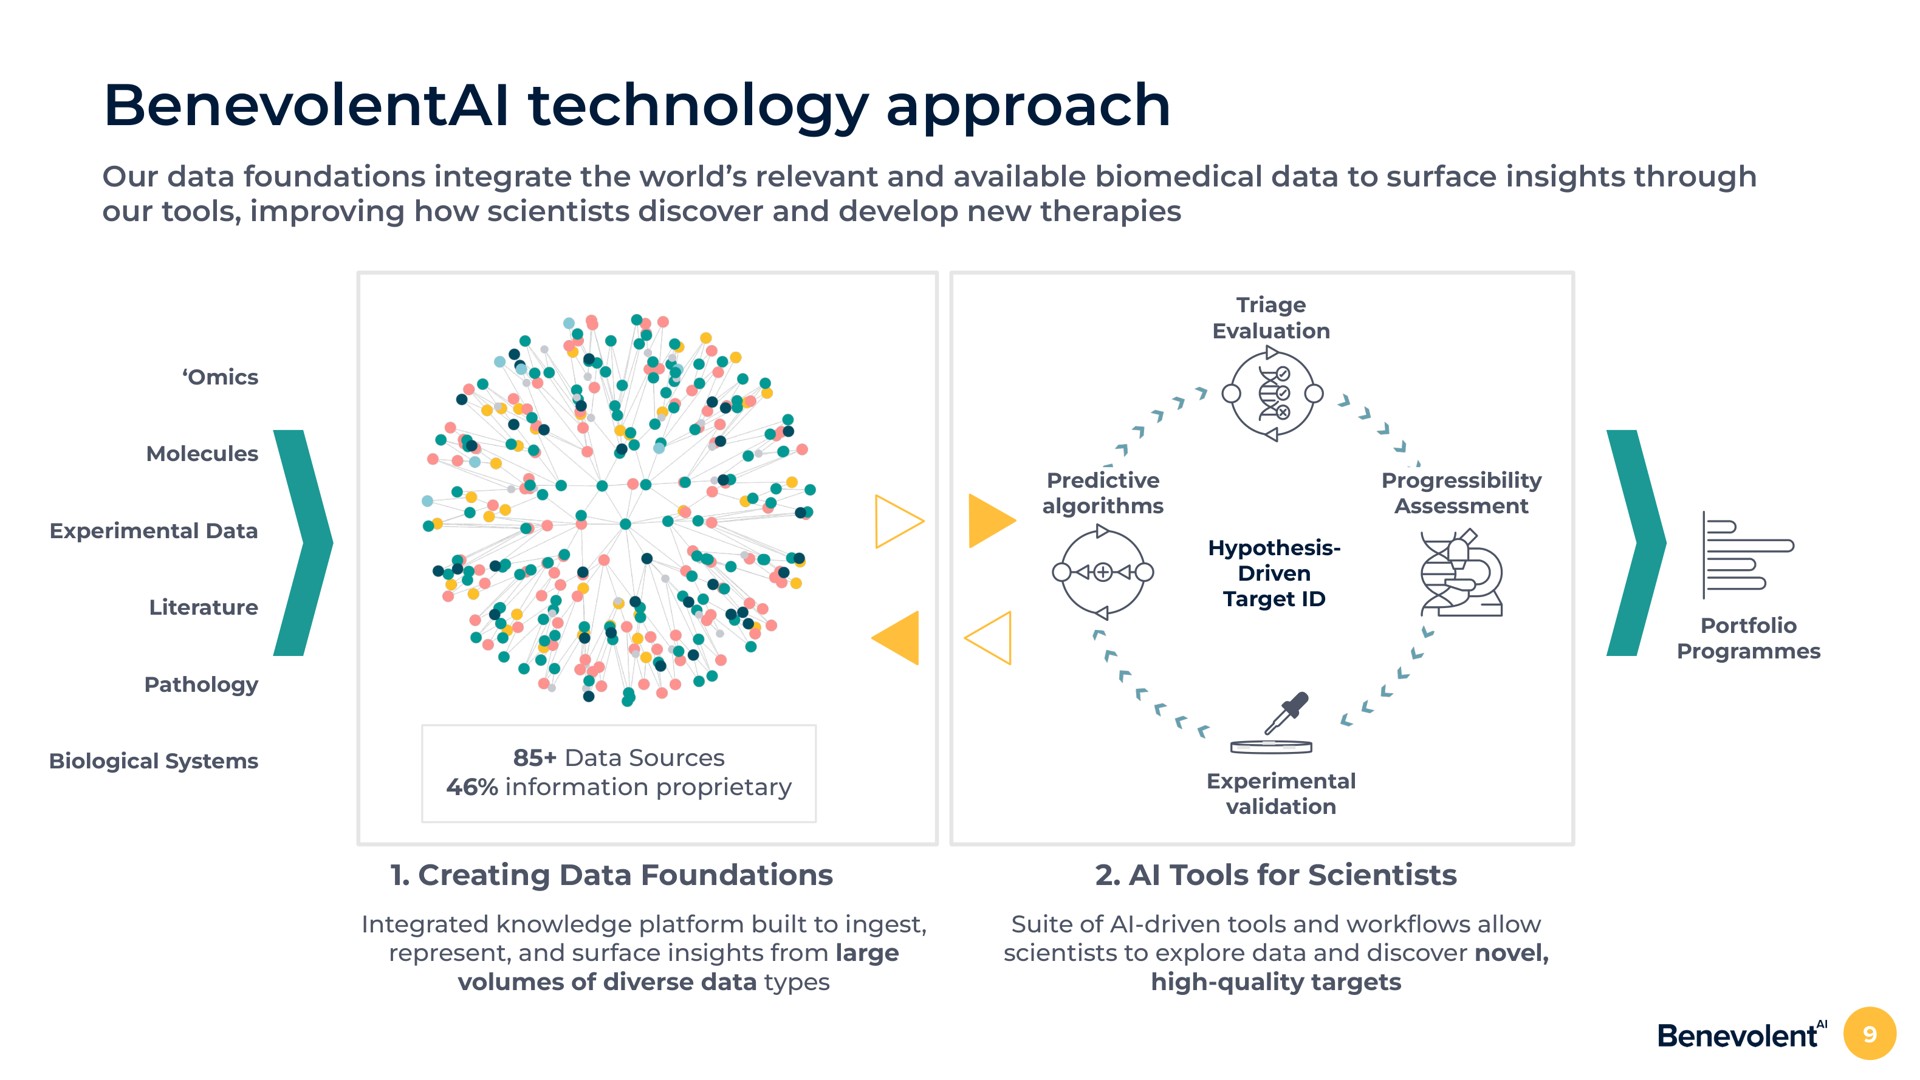 technology approach our data foundations integrate the world relevant and available data to surface insights through our tools improving how scientists discover and develop new therapies creating data foundations tools for scientists | BenevolentAI